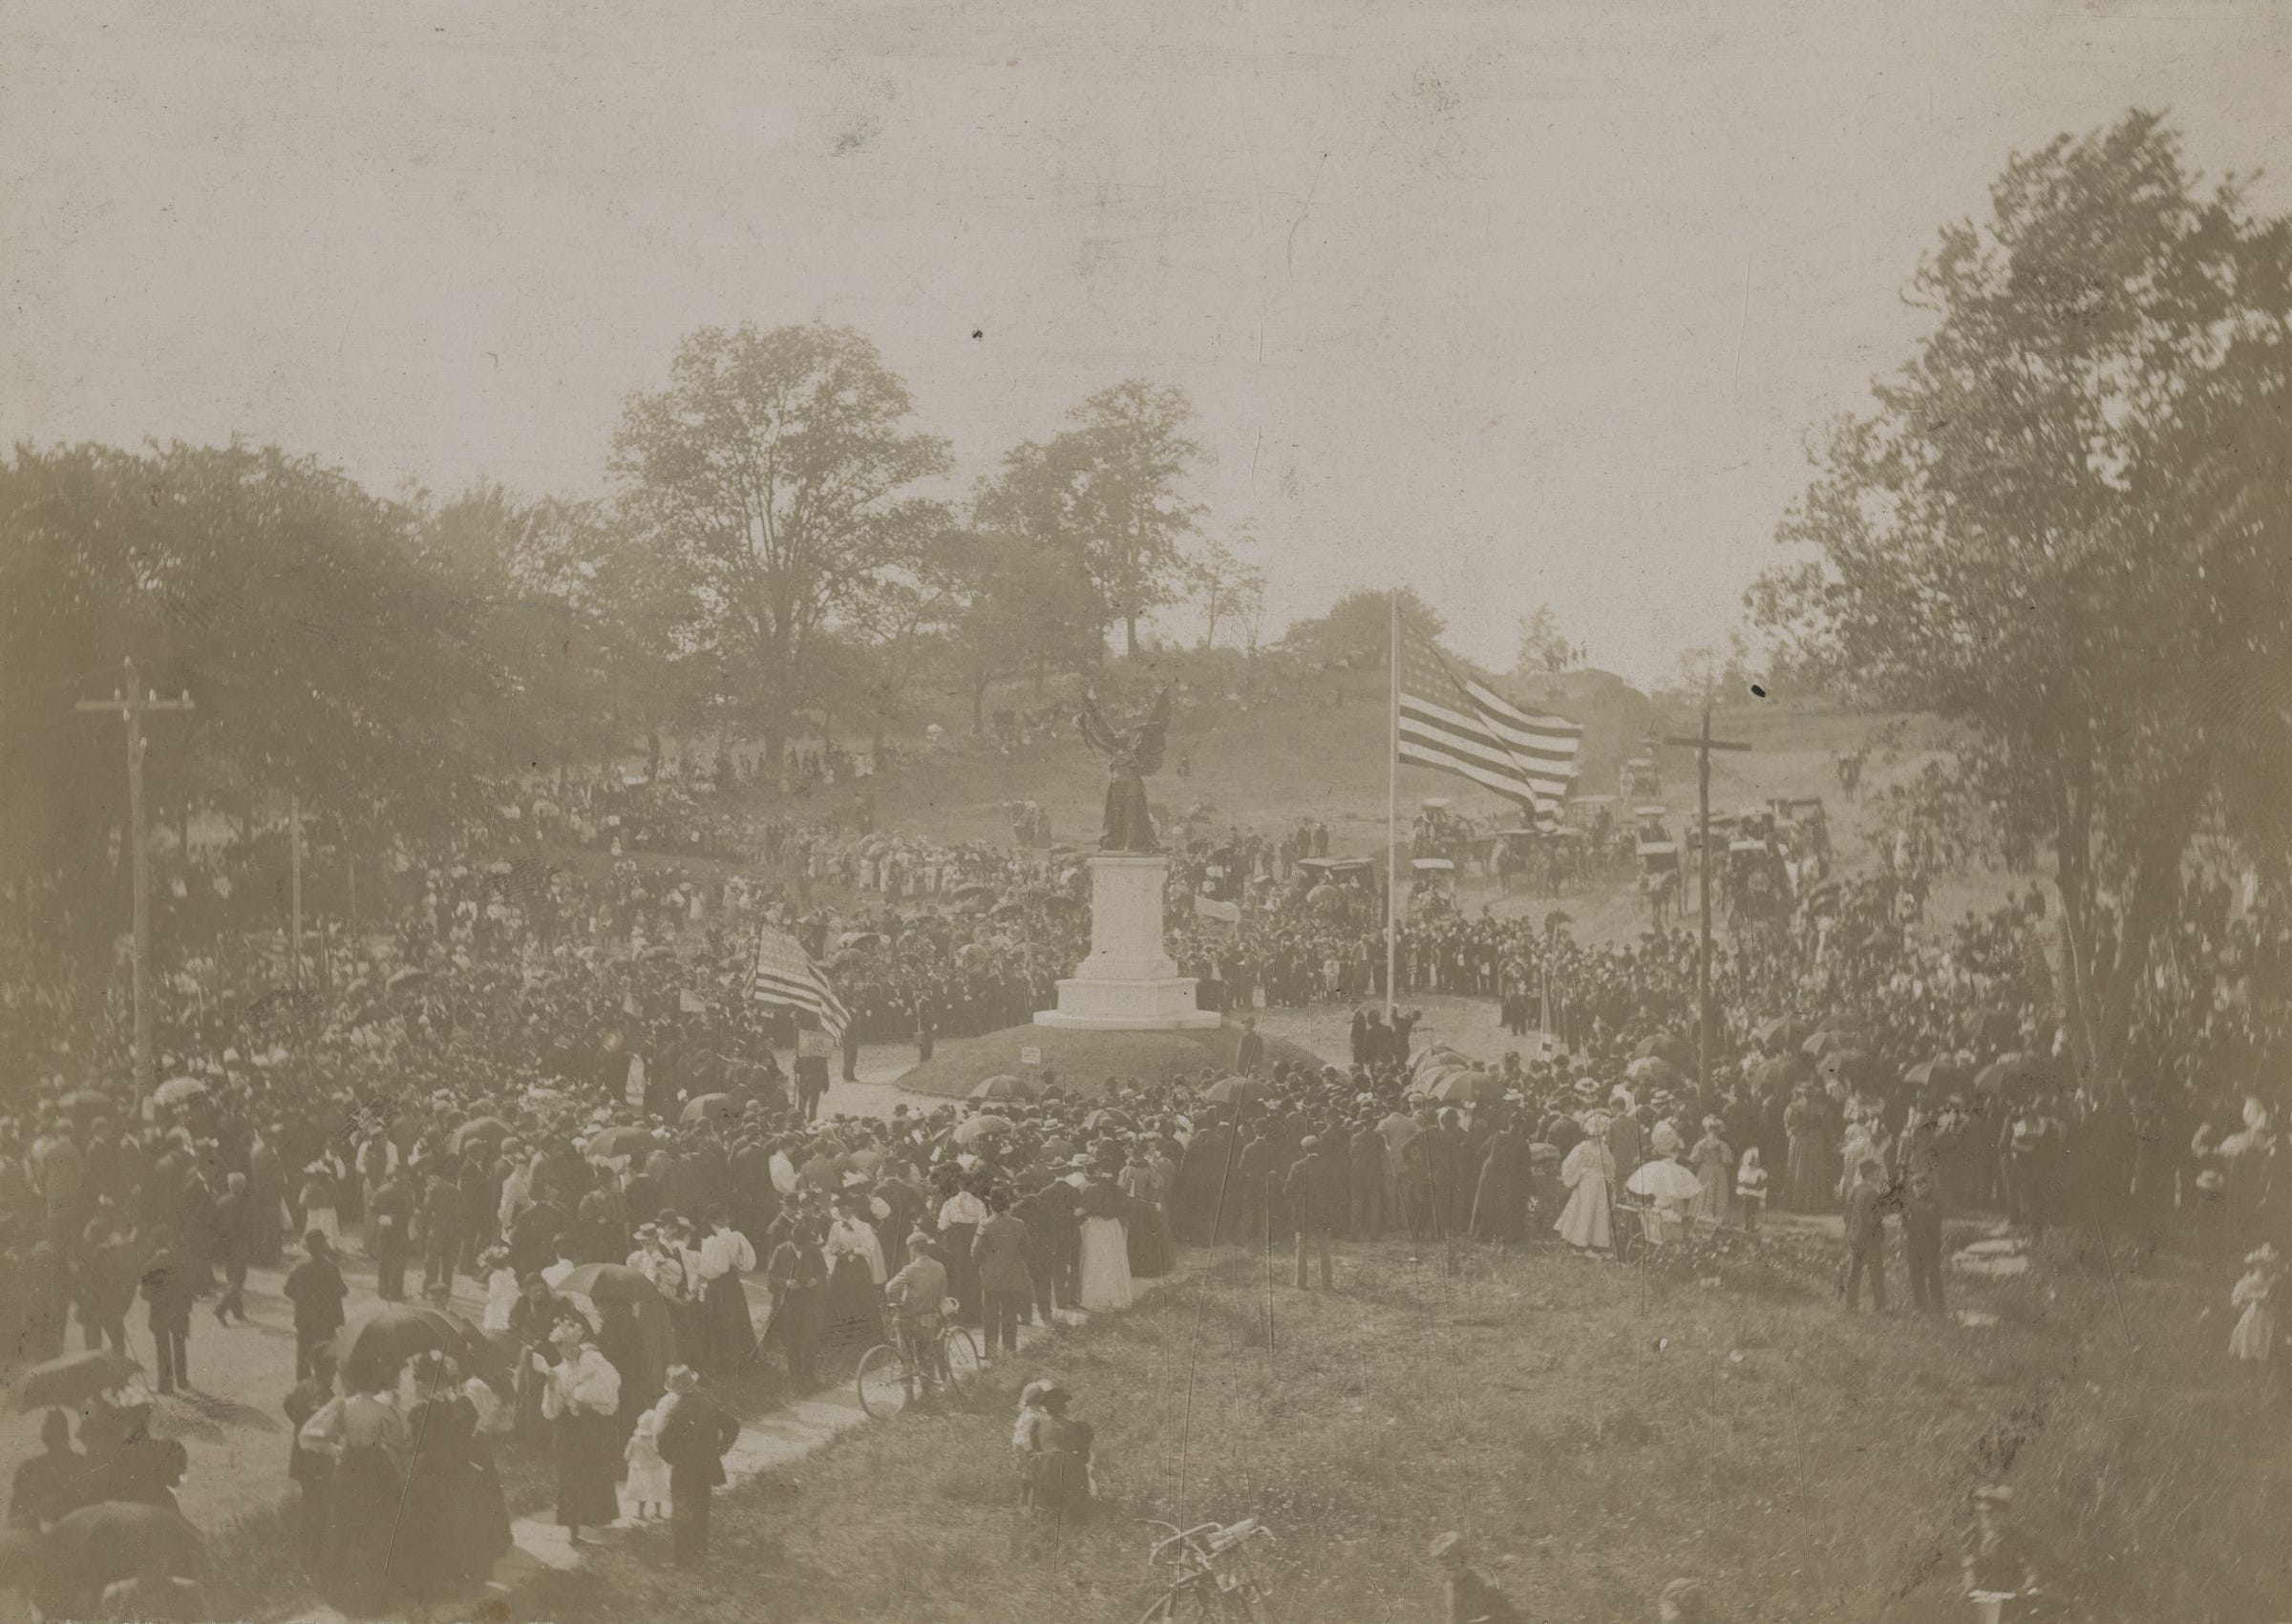 Photograph shows a crowd gathered around the Jamaica Soldiers' and Sailors' Monument at the dedication ceremony. There are trees and hills and many people, horse carriages, flags blowing in the wind. That only a few people have umbrellas suggest it was a warm sunny day.